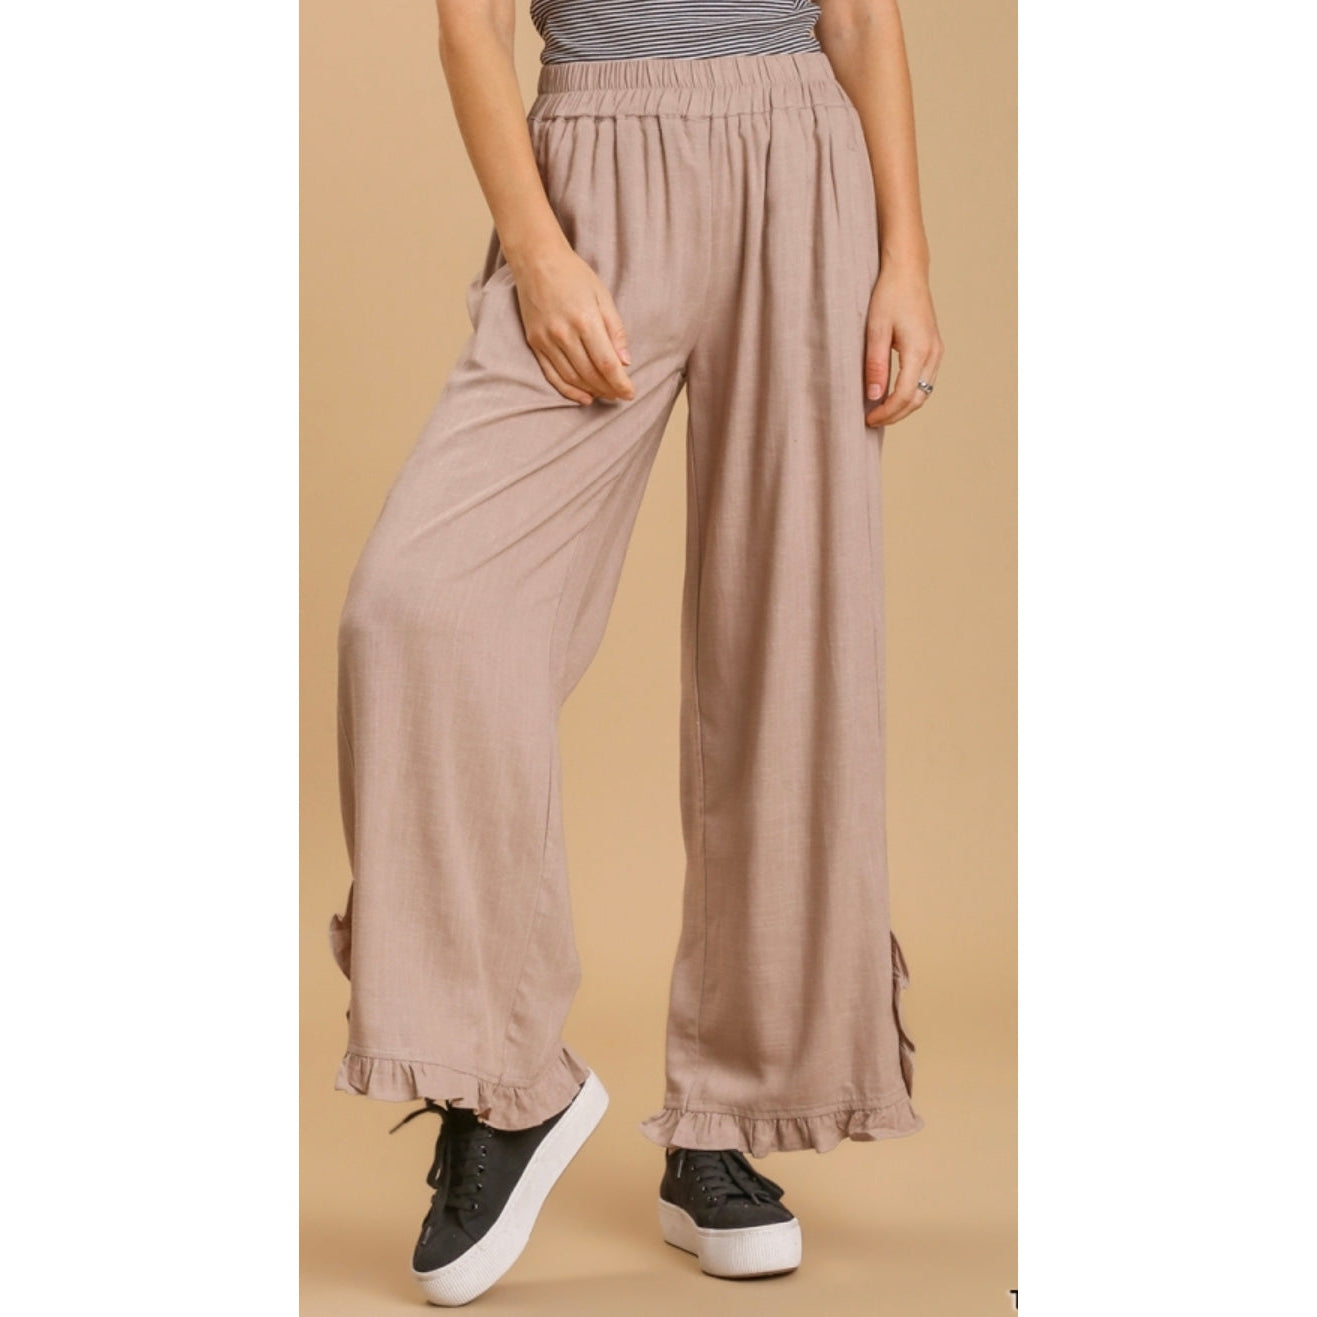 TAUPE RUFFLE HEM LINEN PANTS-Body and Sol